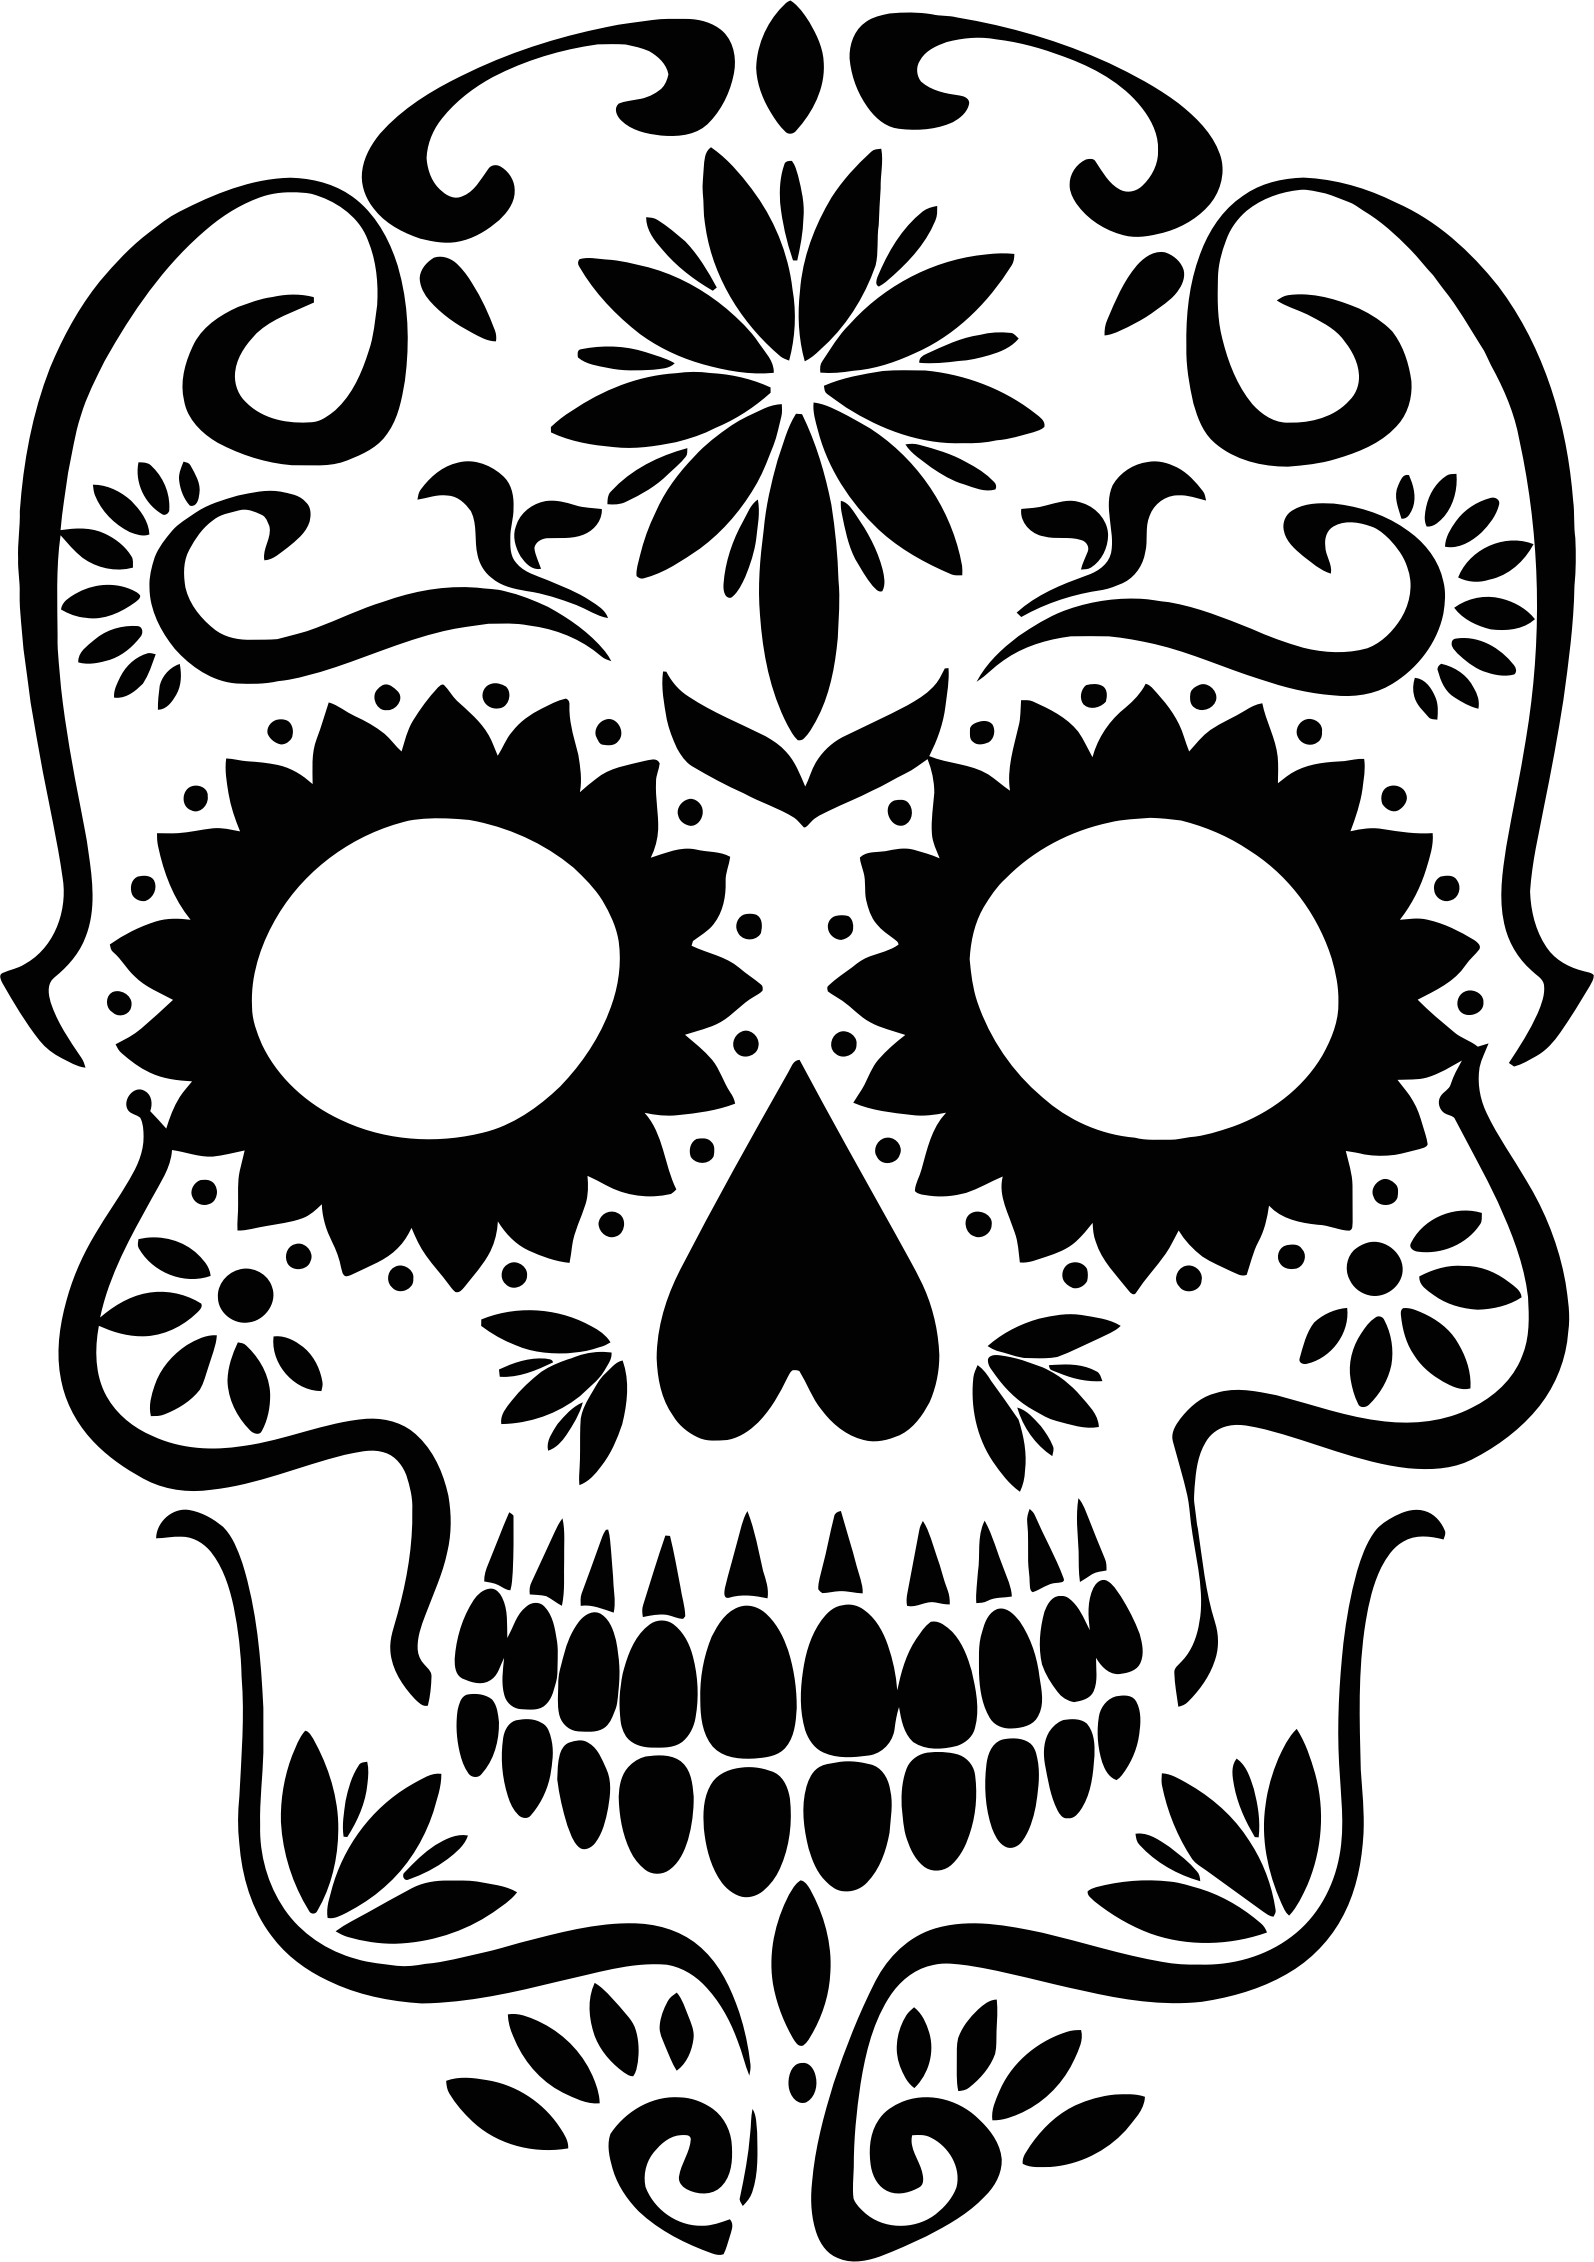 Clipart Skull Silhouette Transparent FREE For.